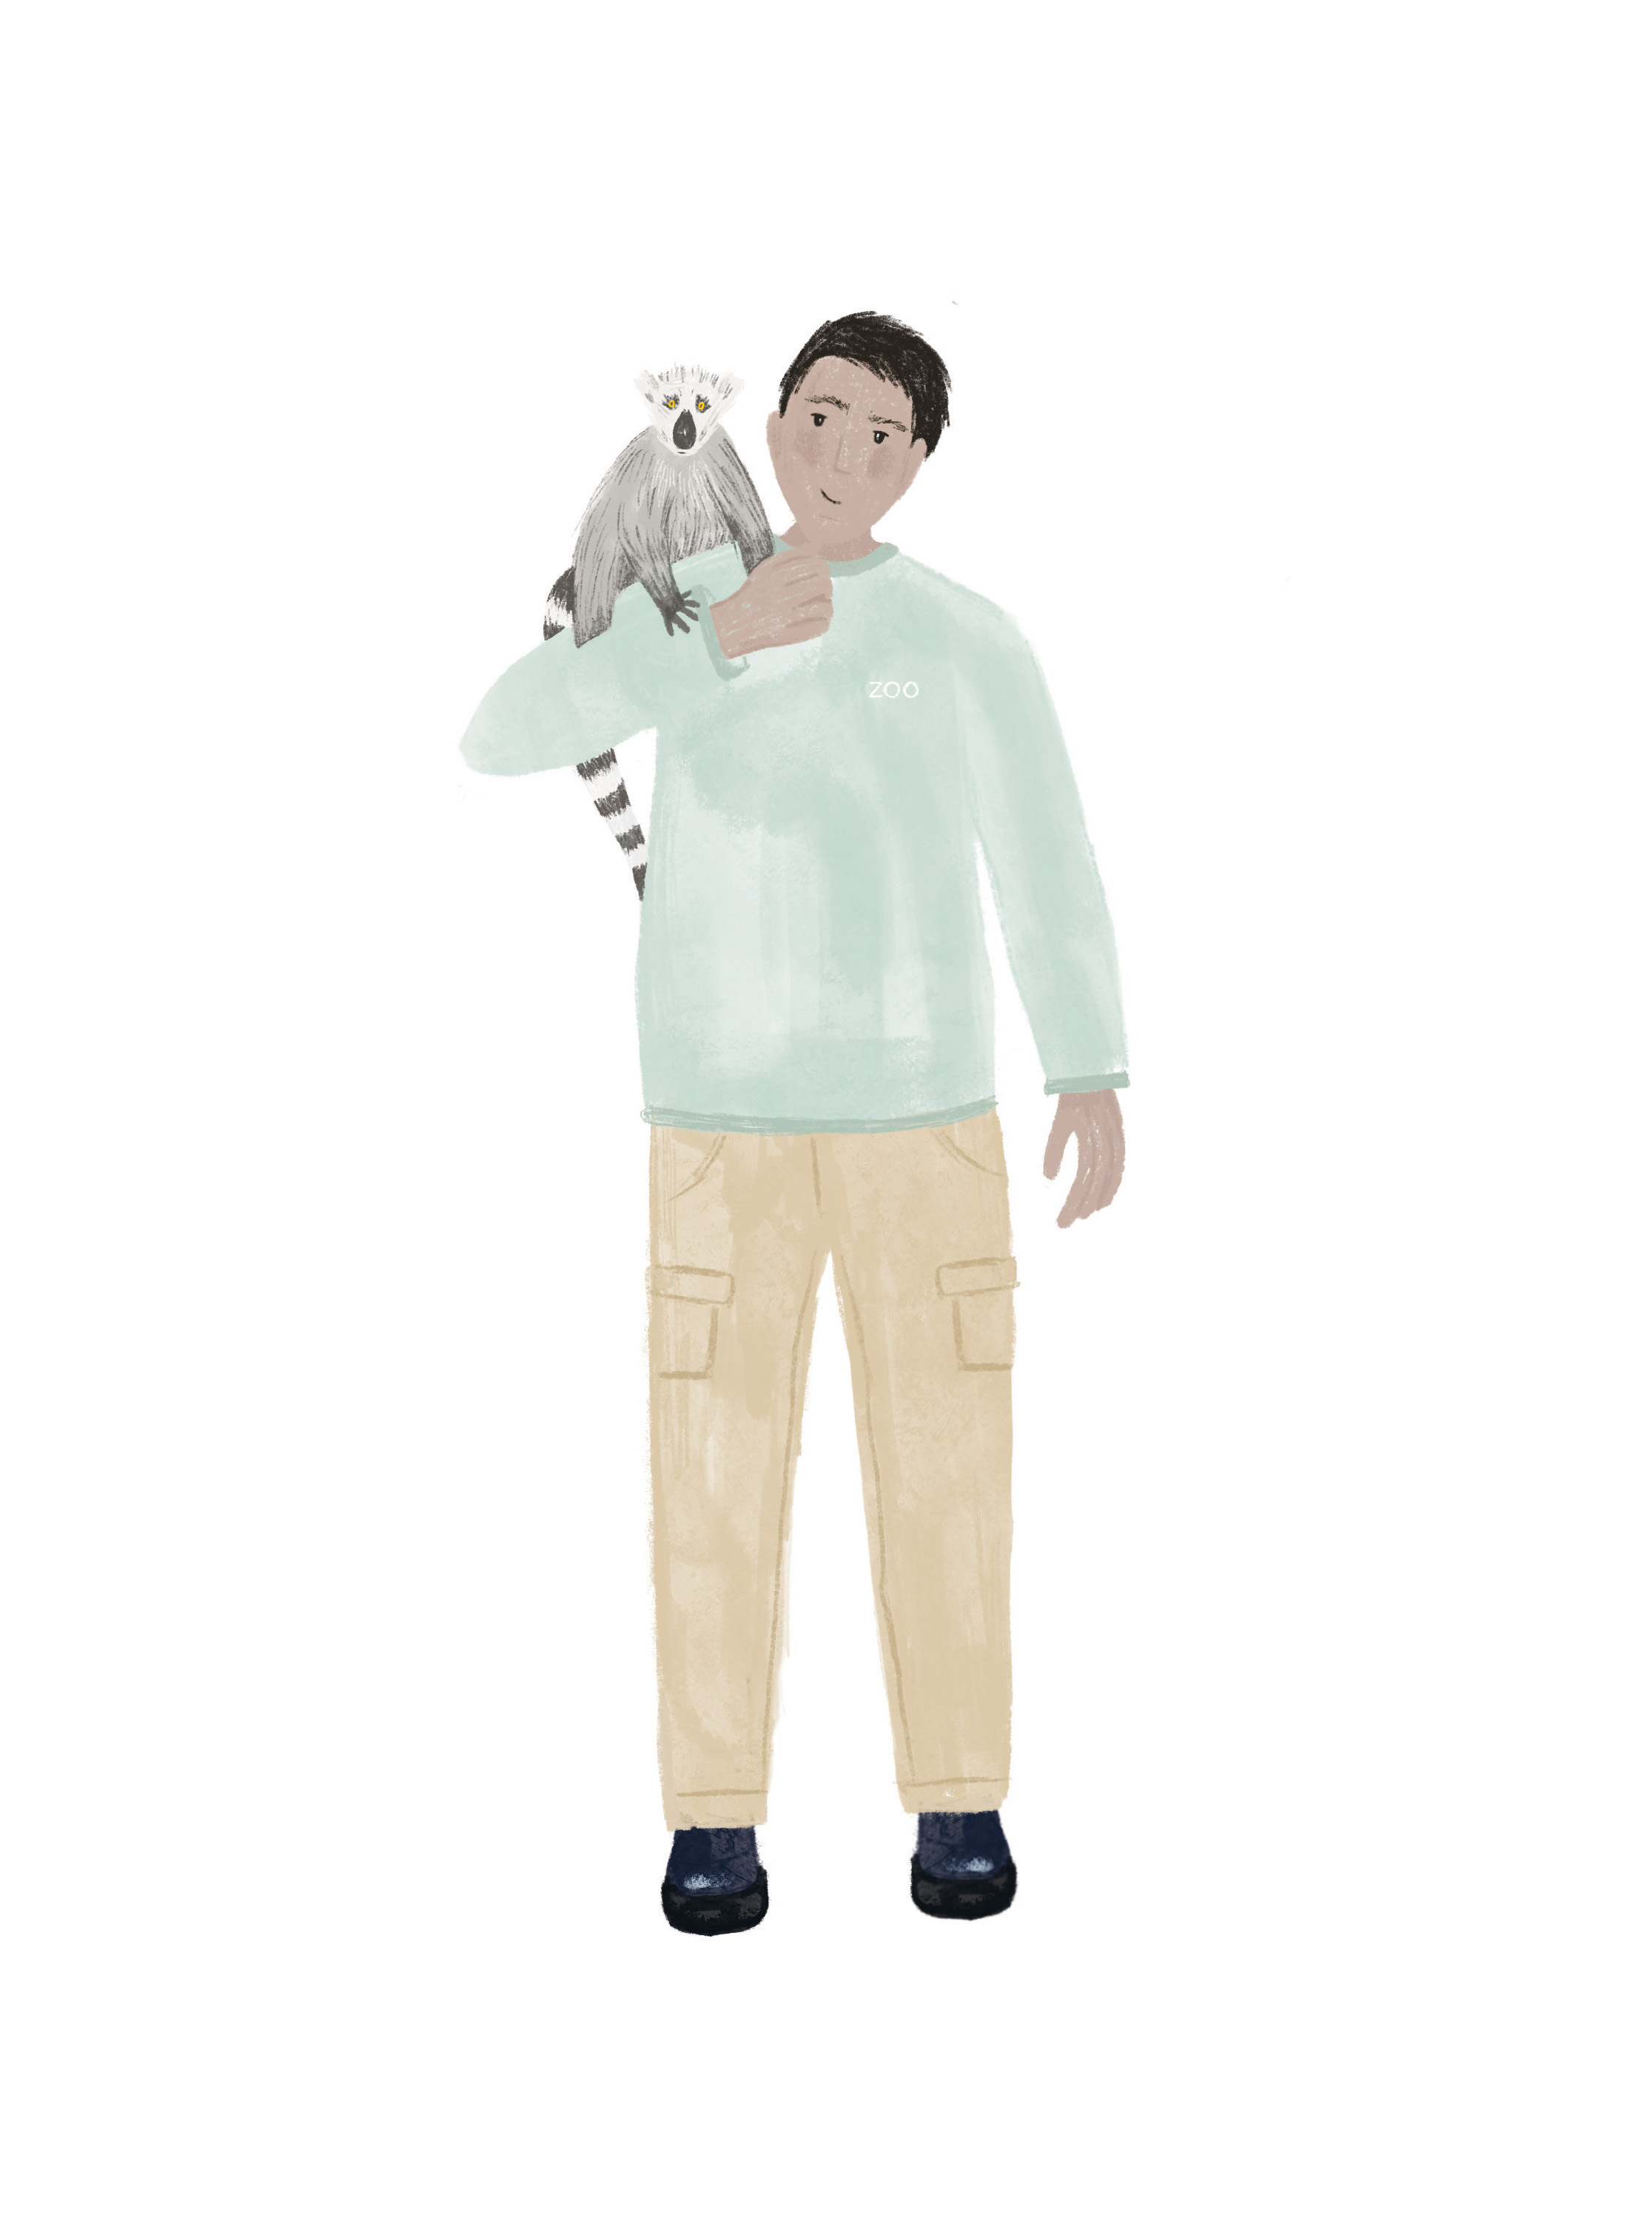 Illustration artwork of a man with an animal